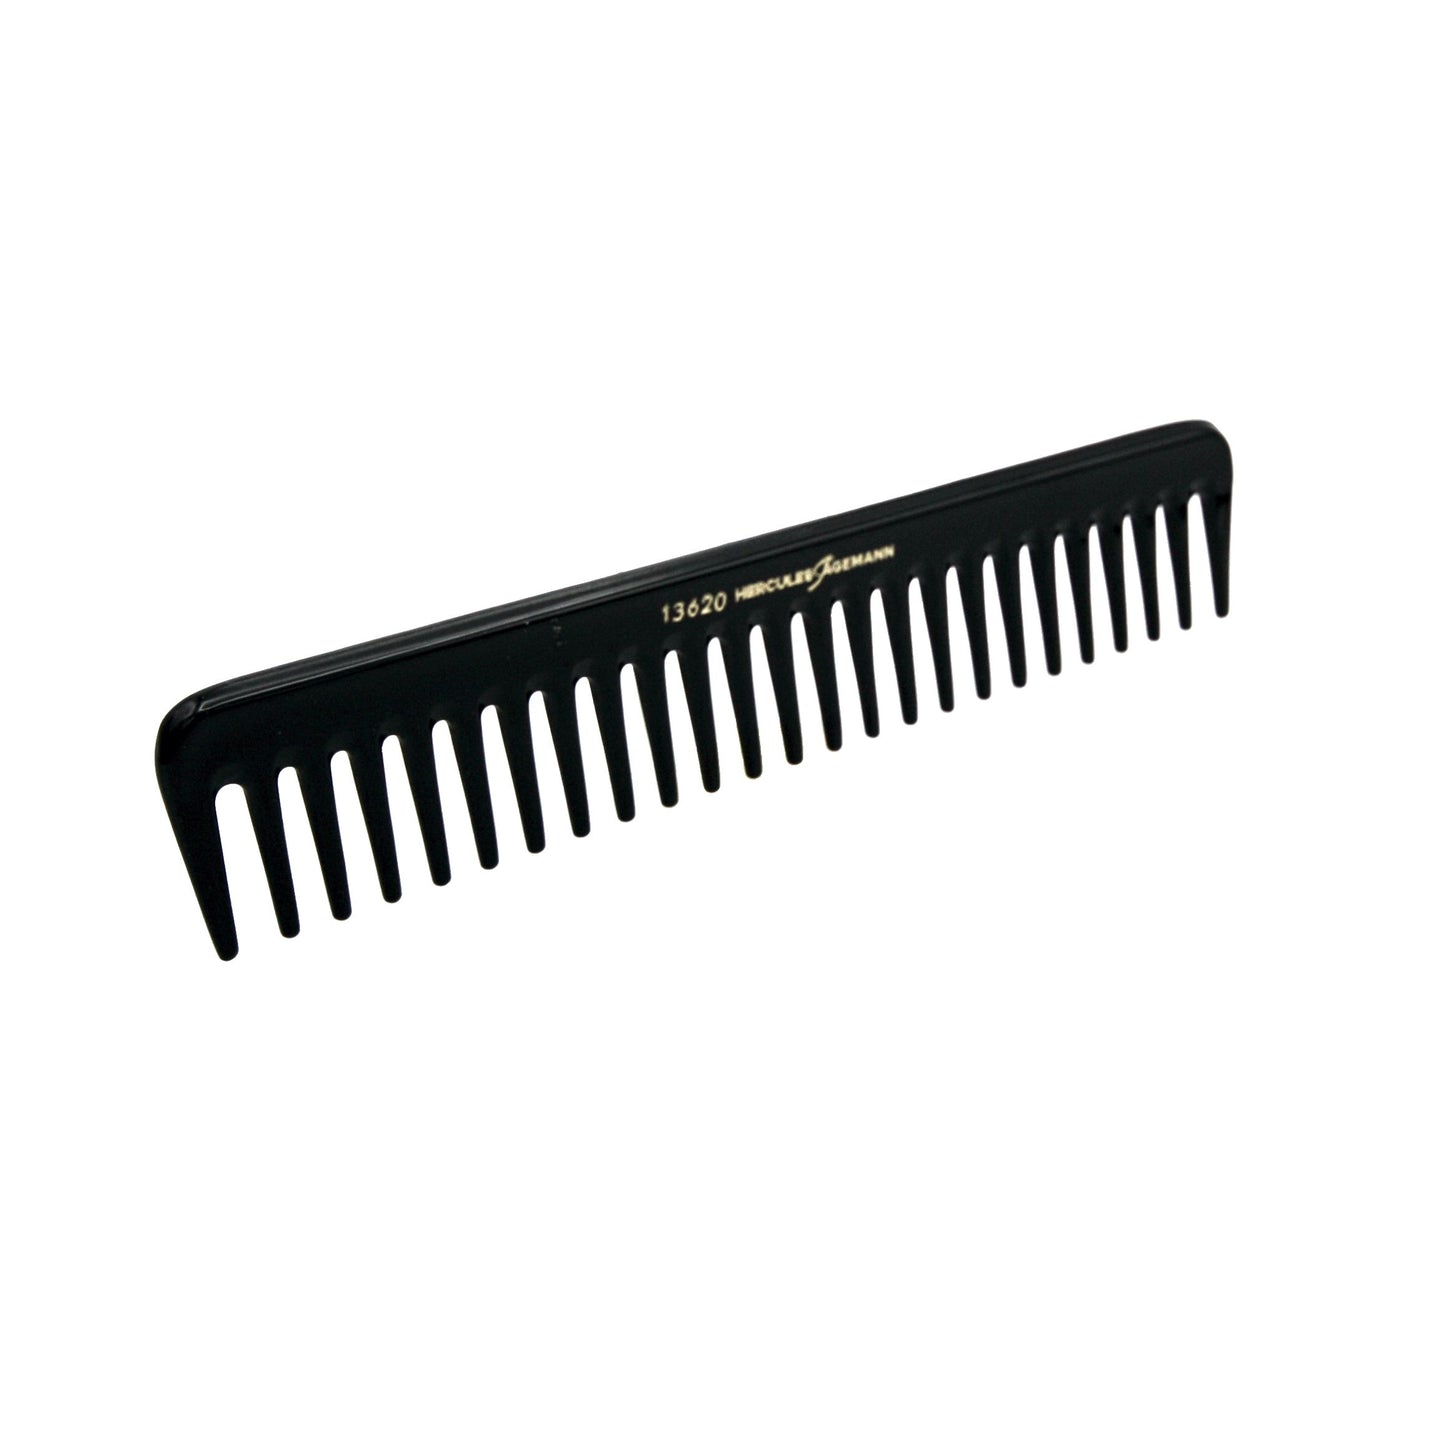 Hard Rubber, 7.5in Wide Tooth Styling Comb, Hercules Sagemann 13620